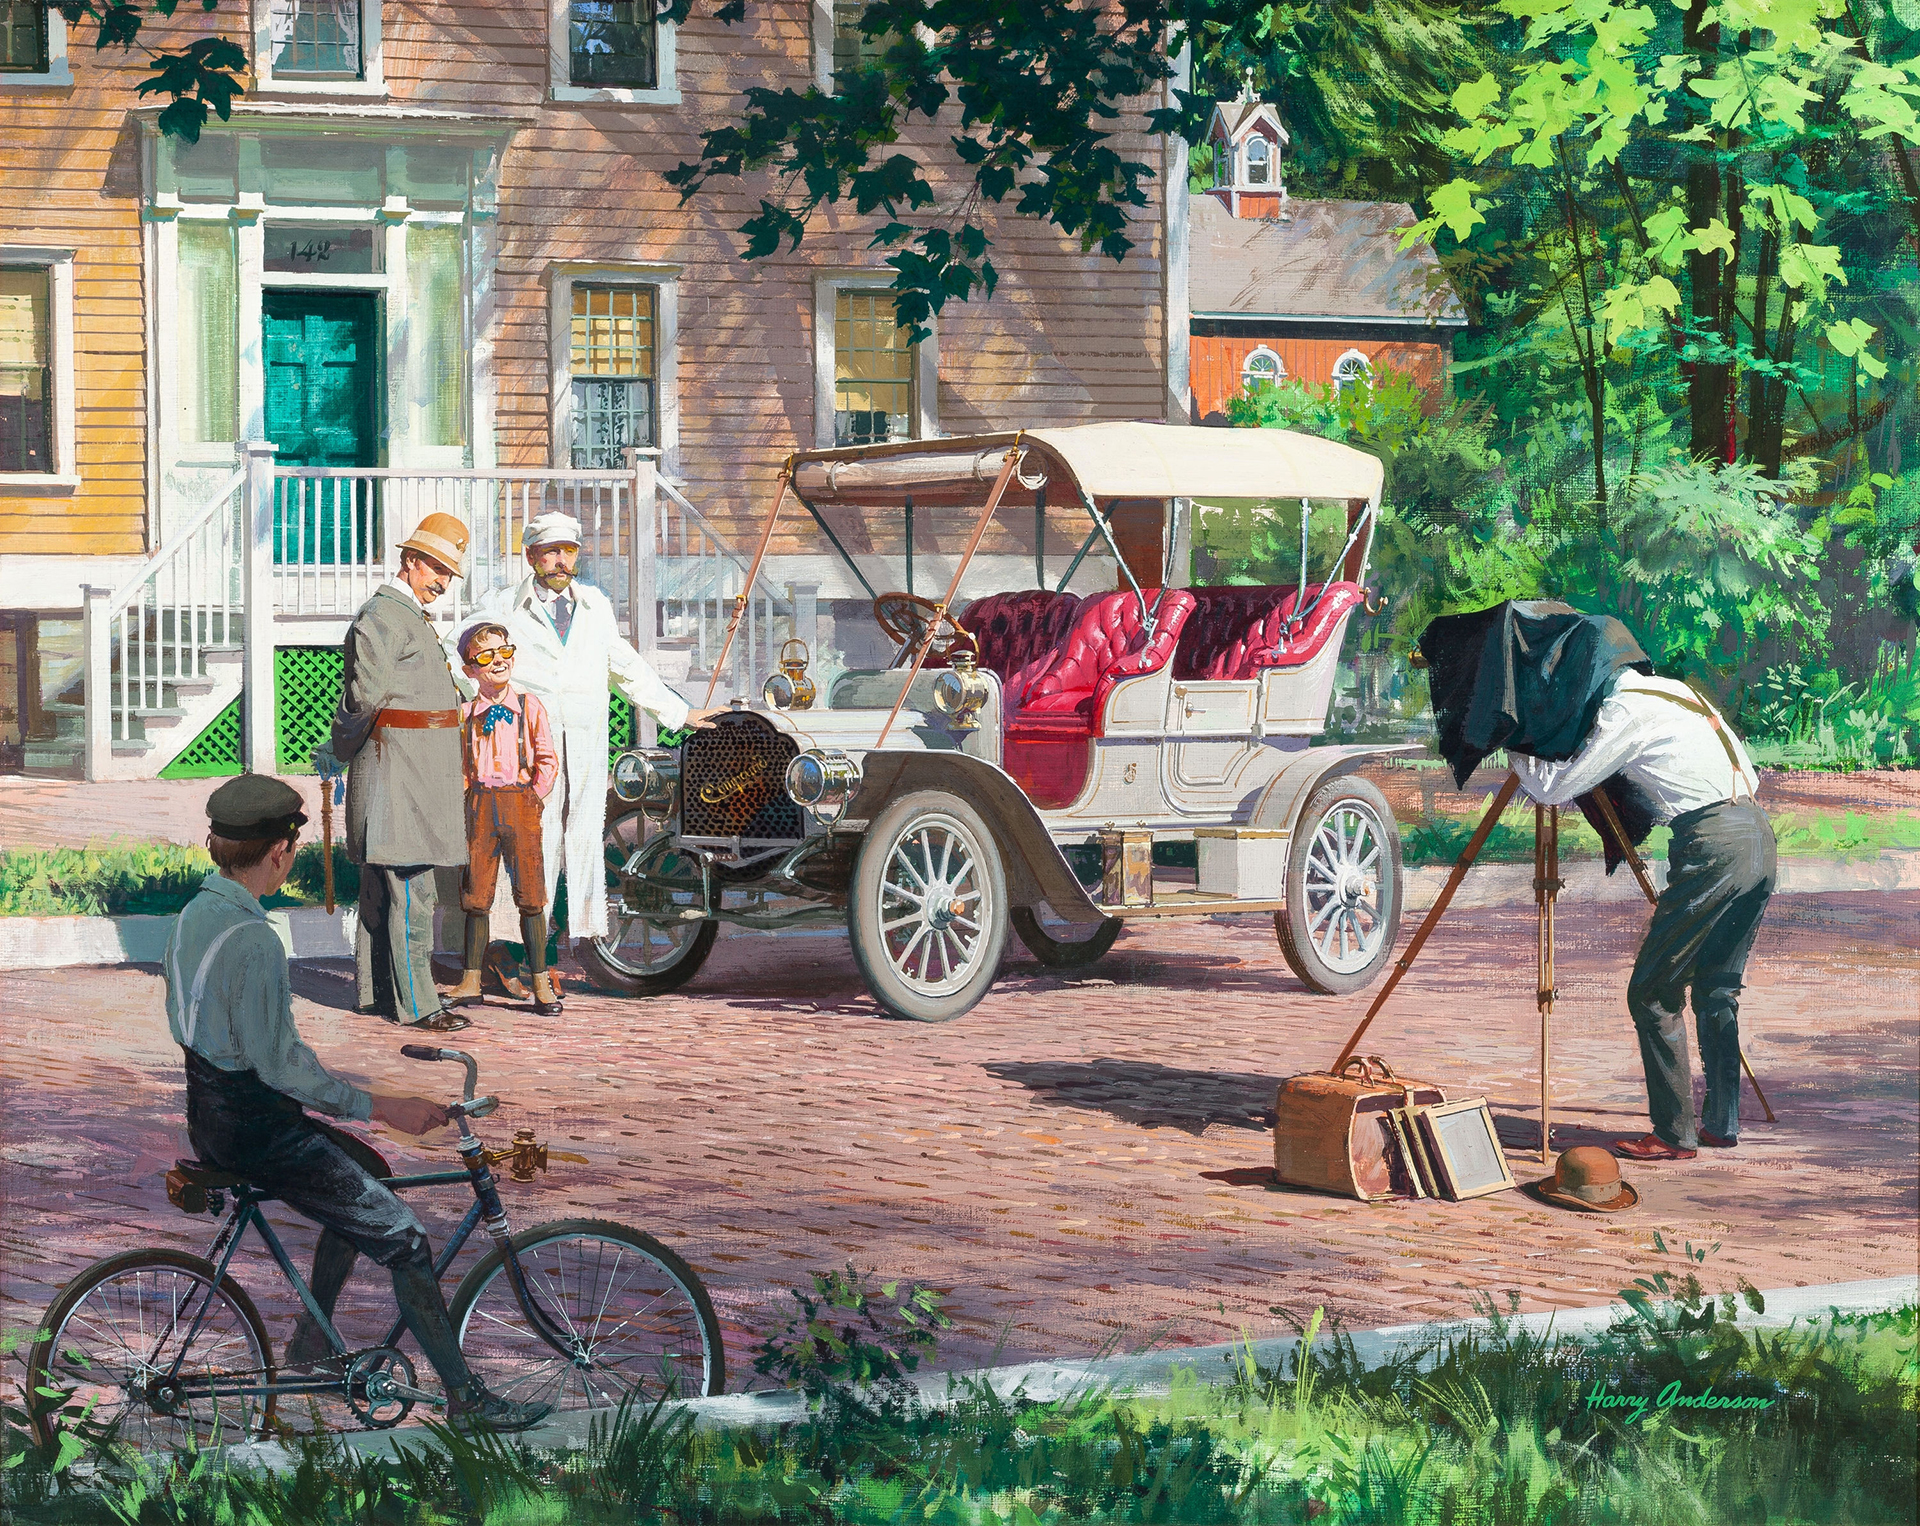 1906 Compound: The First Family Car - Illustrated by Harry Anderson